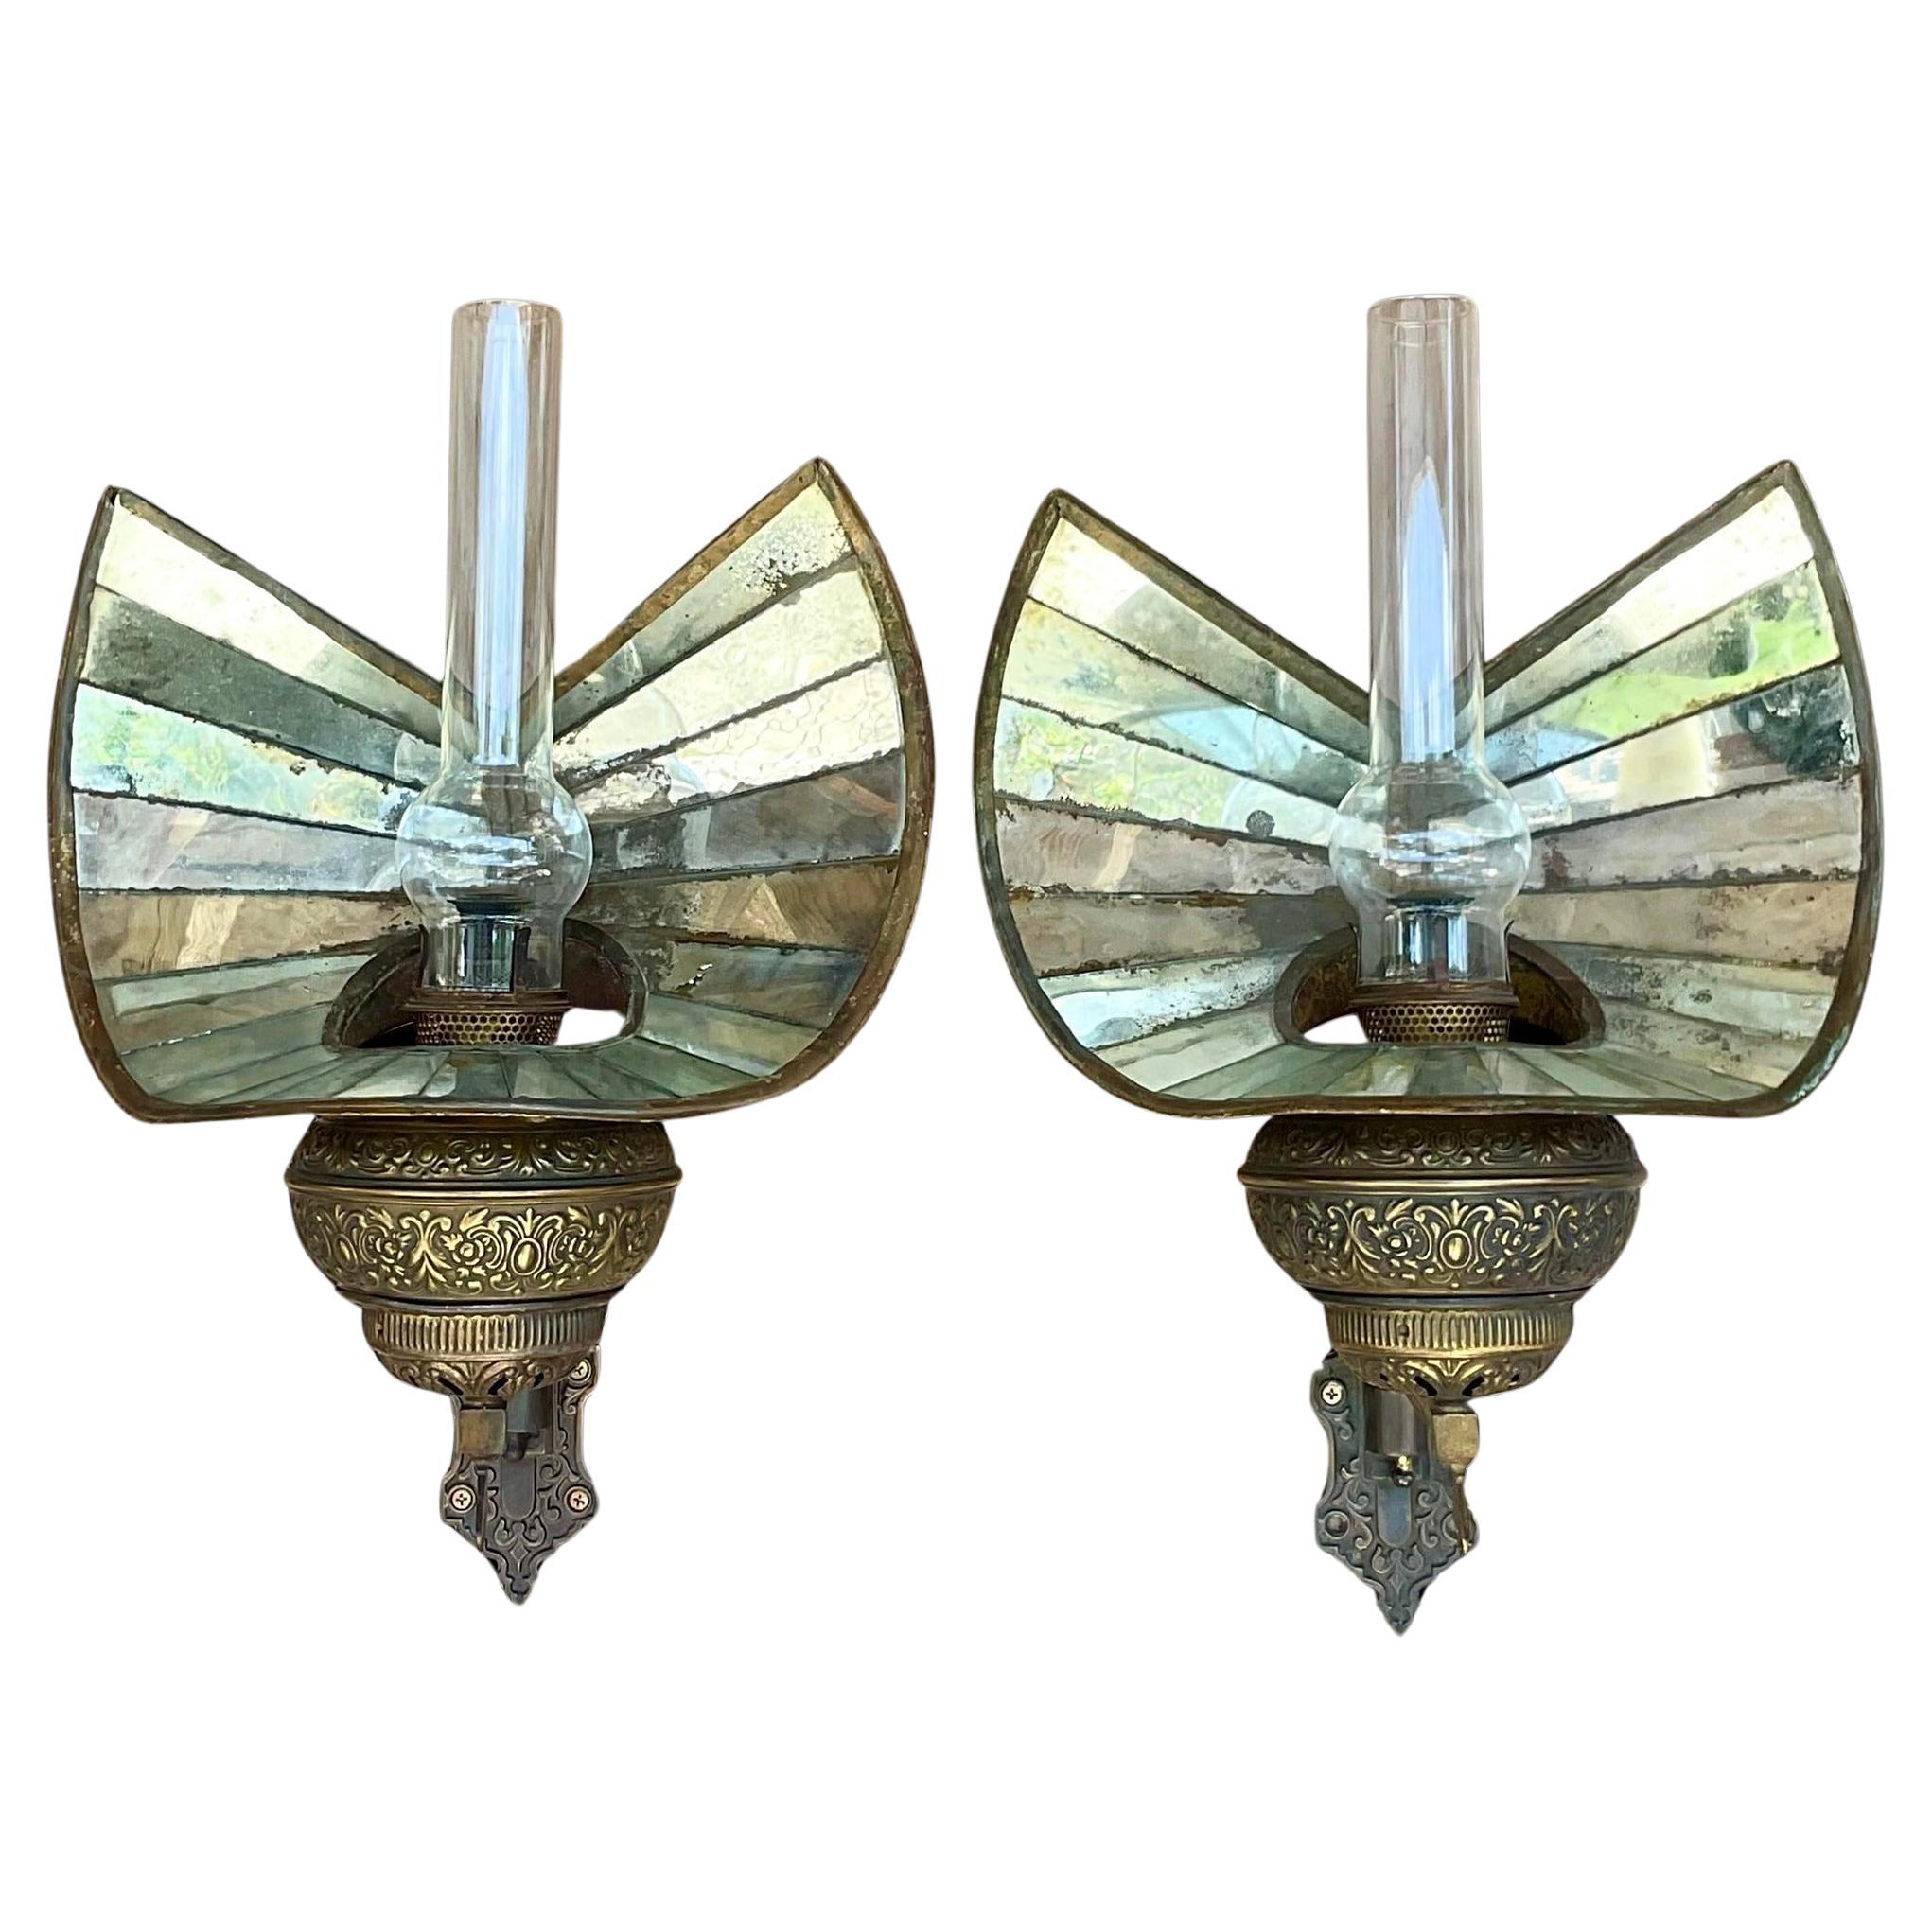 Vintage Boho Wheeler Reflector Co Mirrored Wall Gas Sconce - a Pair For Sale